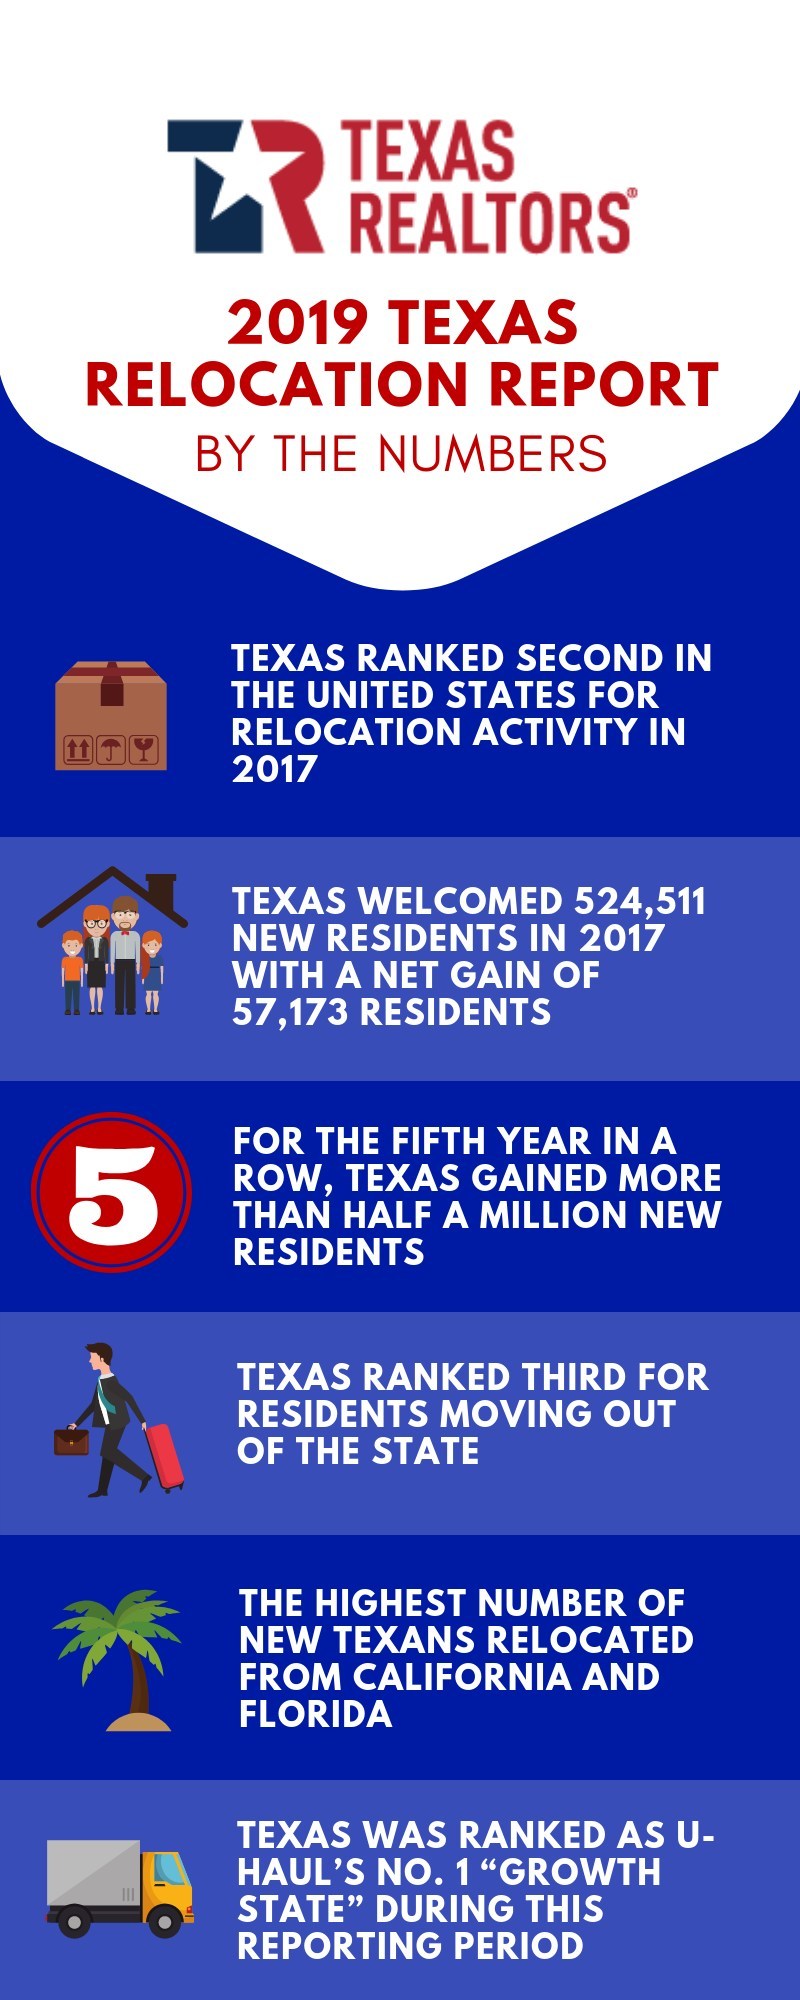 2019 Texas Relocation Report By The Numbers